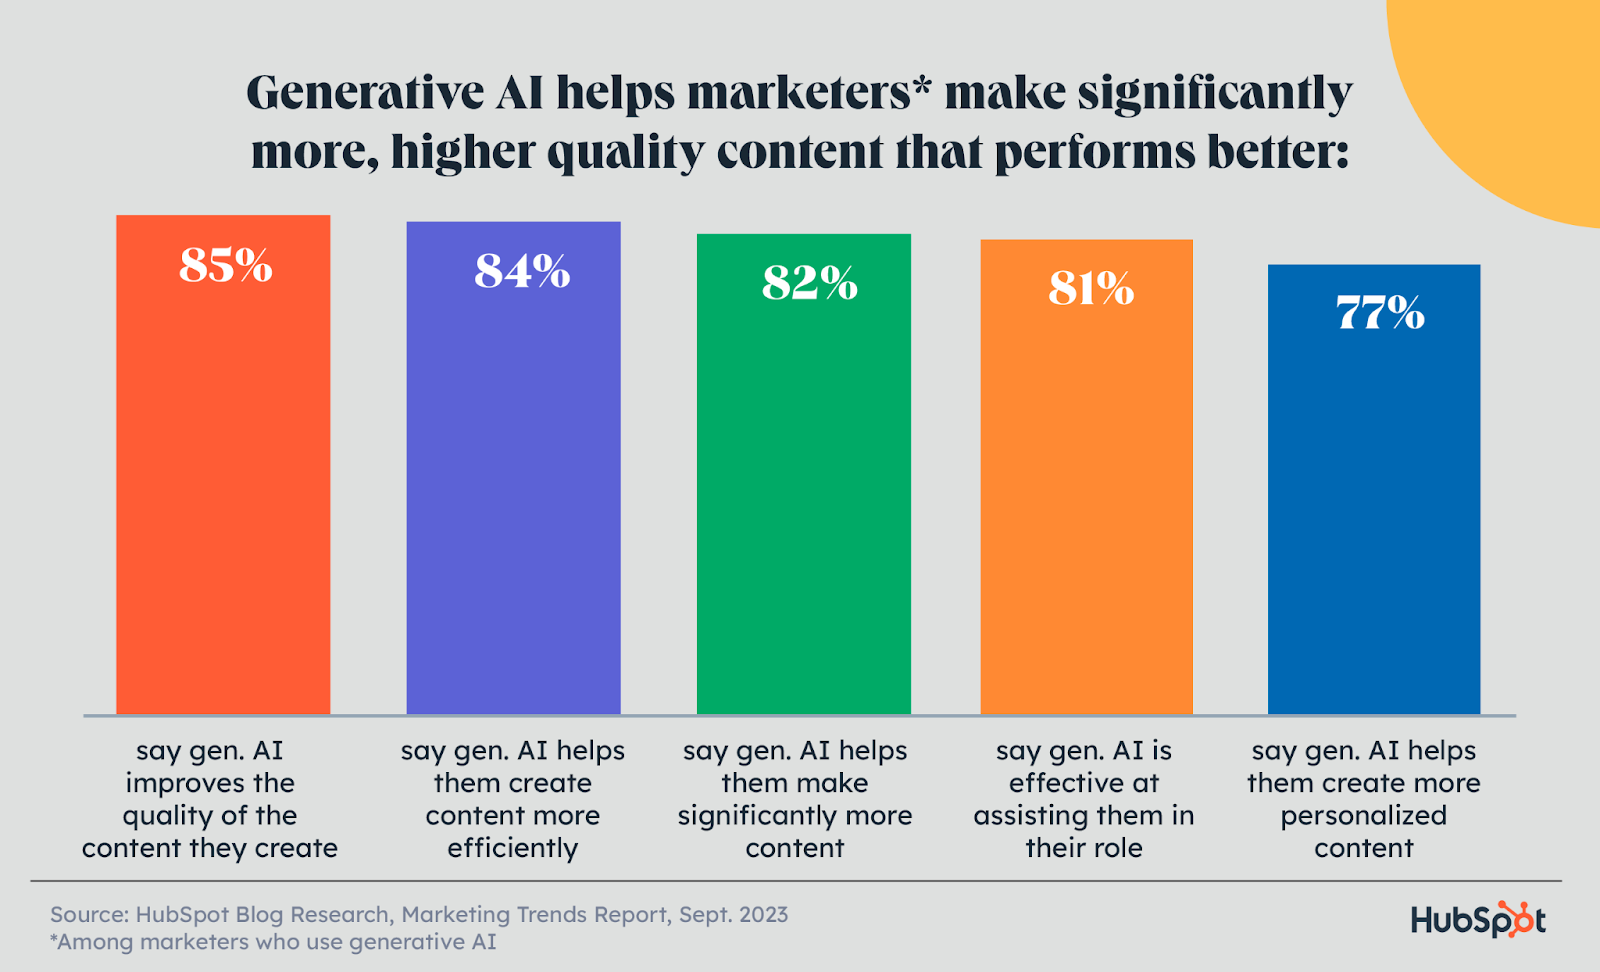 how generative AI helps marketers